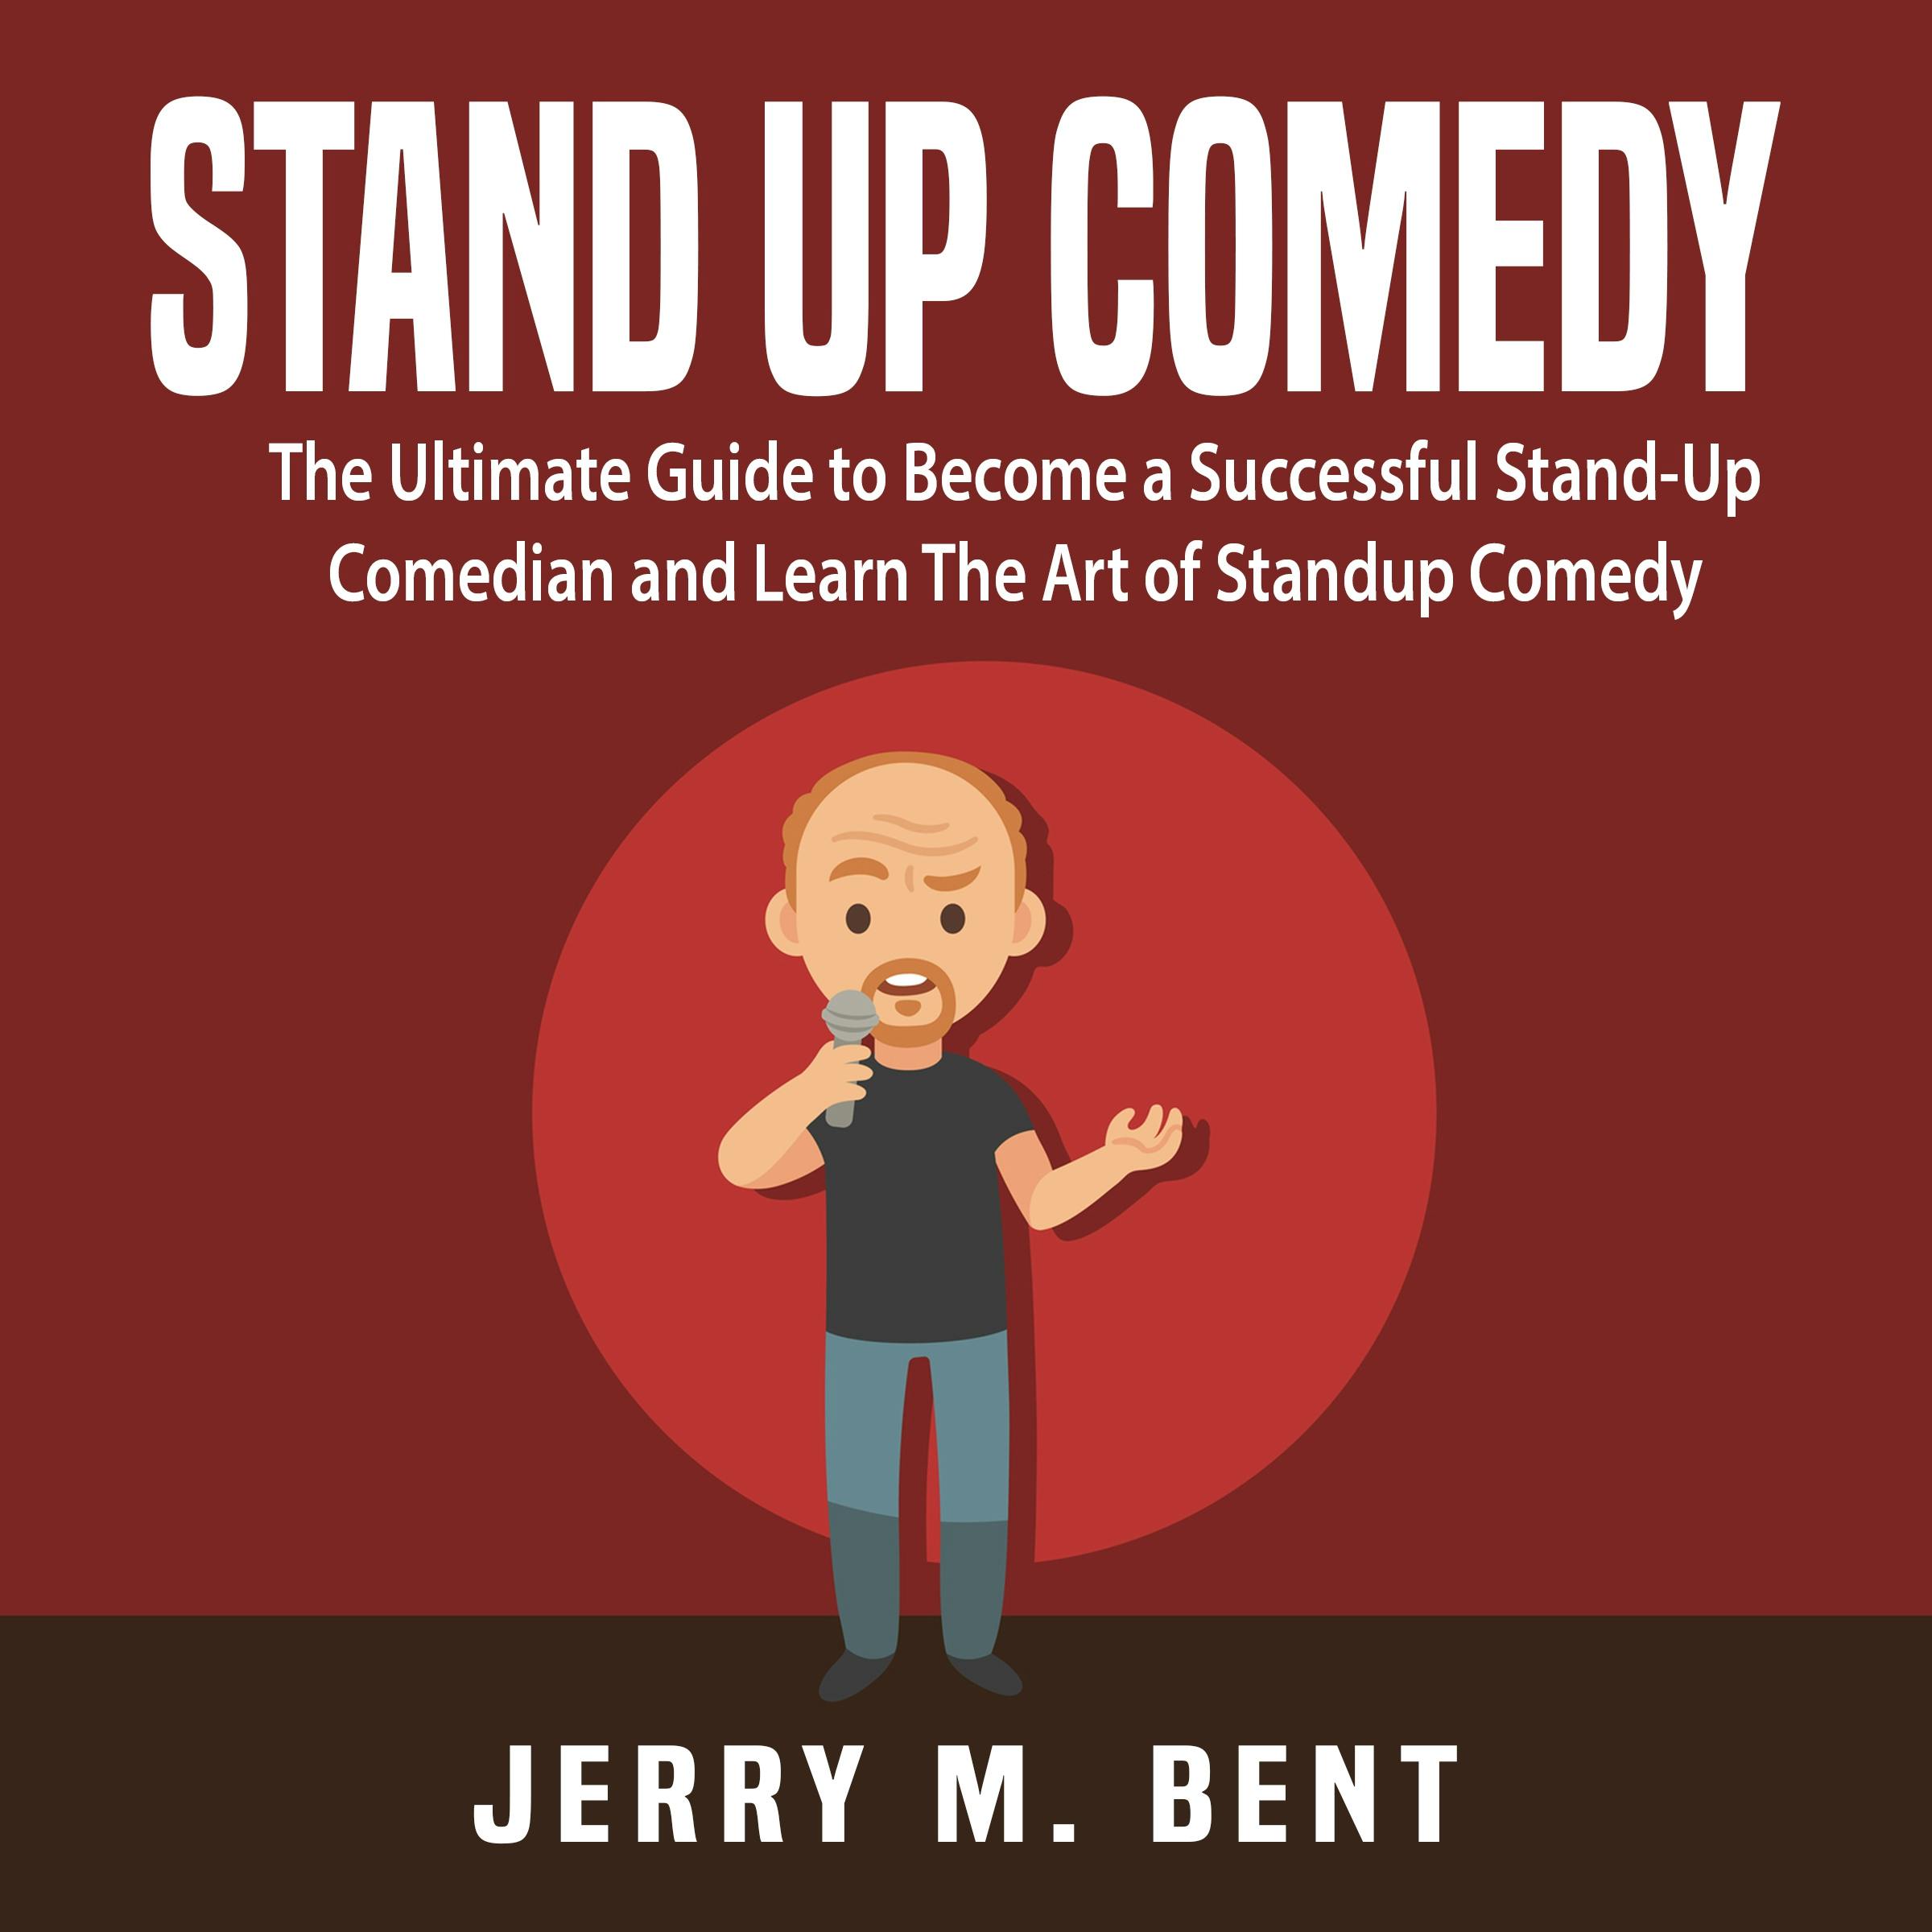 Stand Up Comedy: The Ultimate Guide to Become a Successful Stand-Up Comedian and Learn the Art of Standup Comedy - Jerry M. Bent